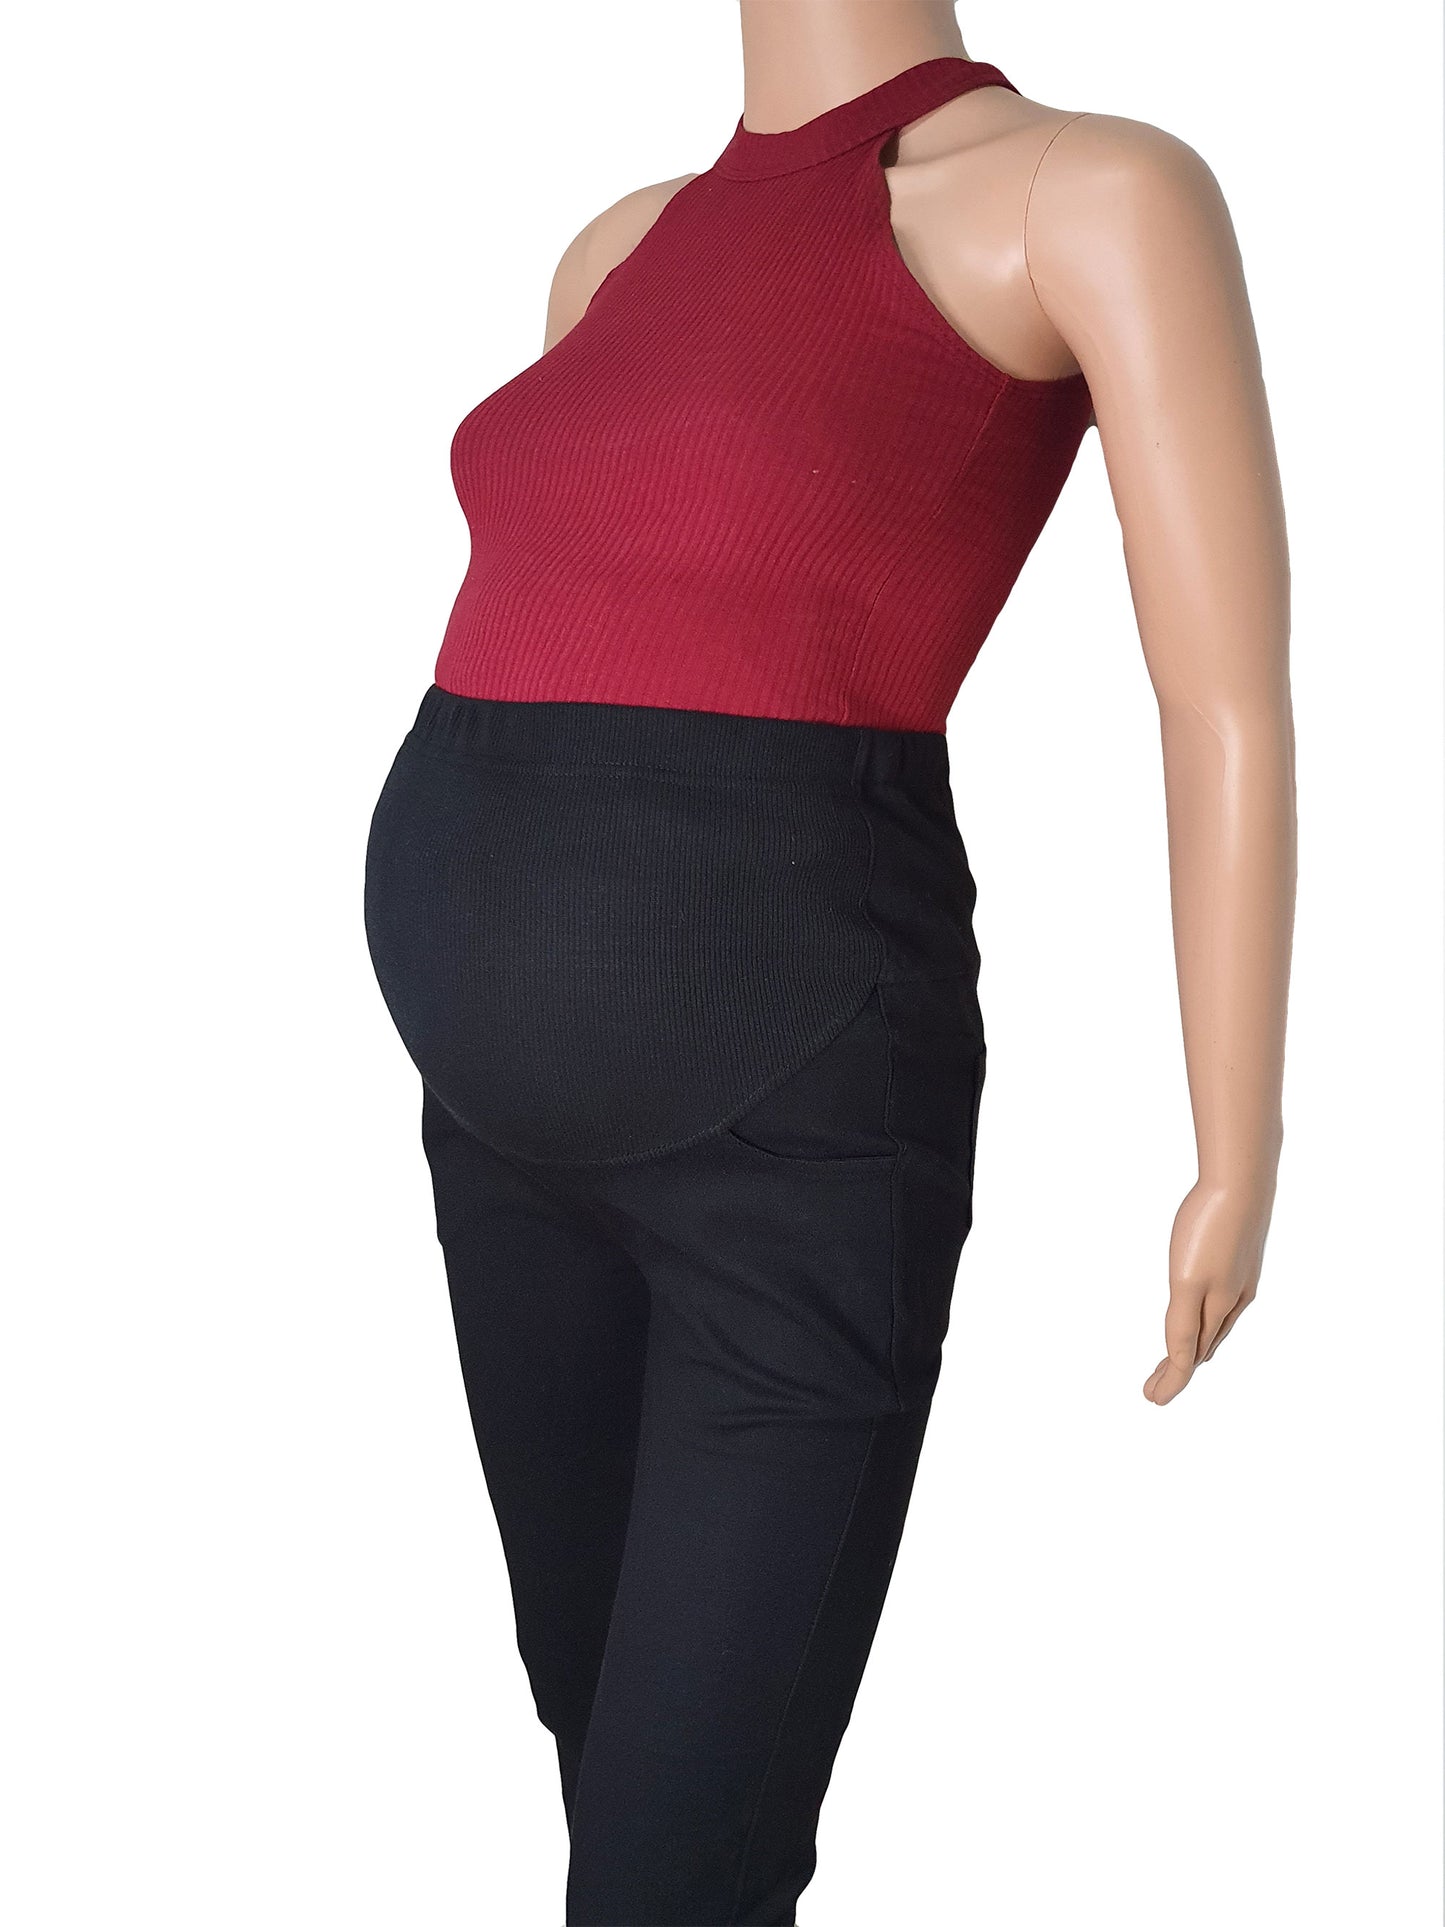 Maternity Pregnancy Pants Stretchable with Adjustable Waist Garter